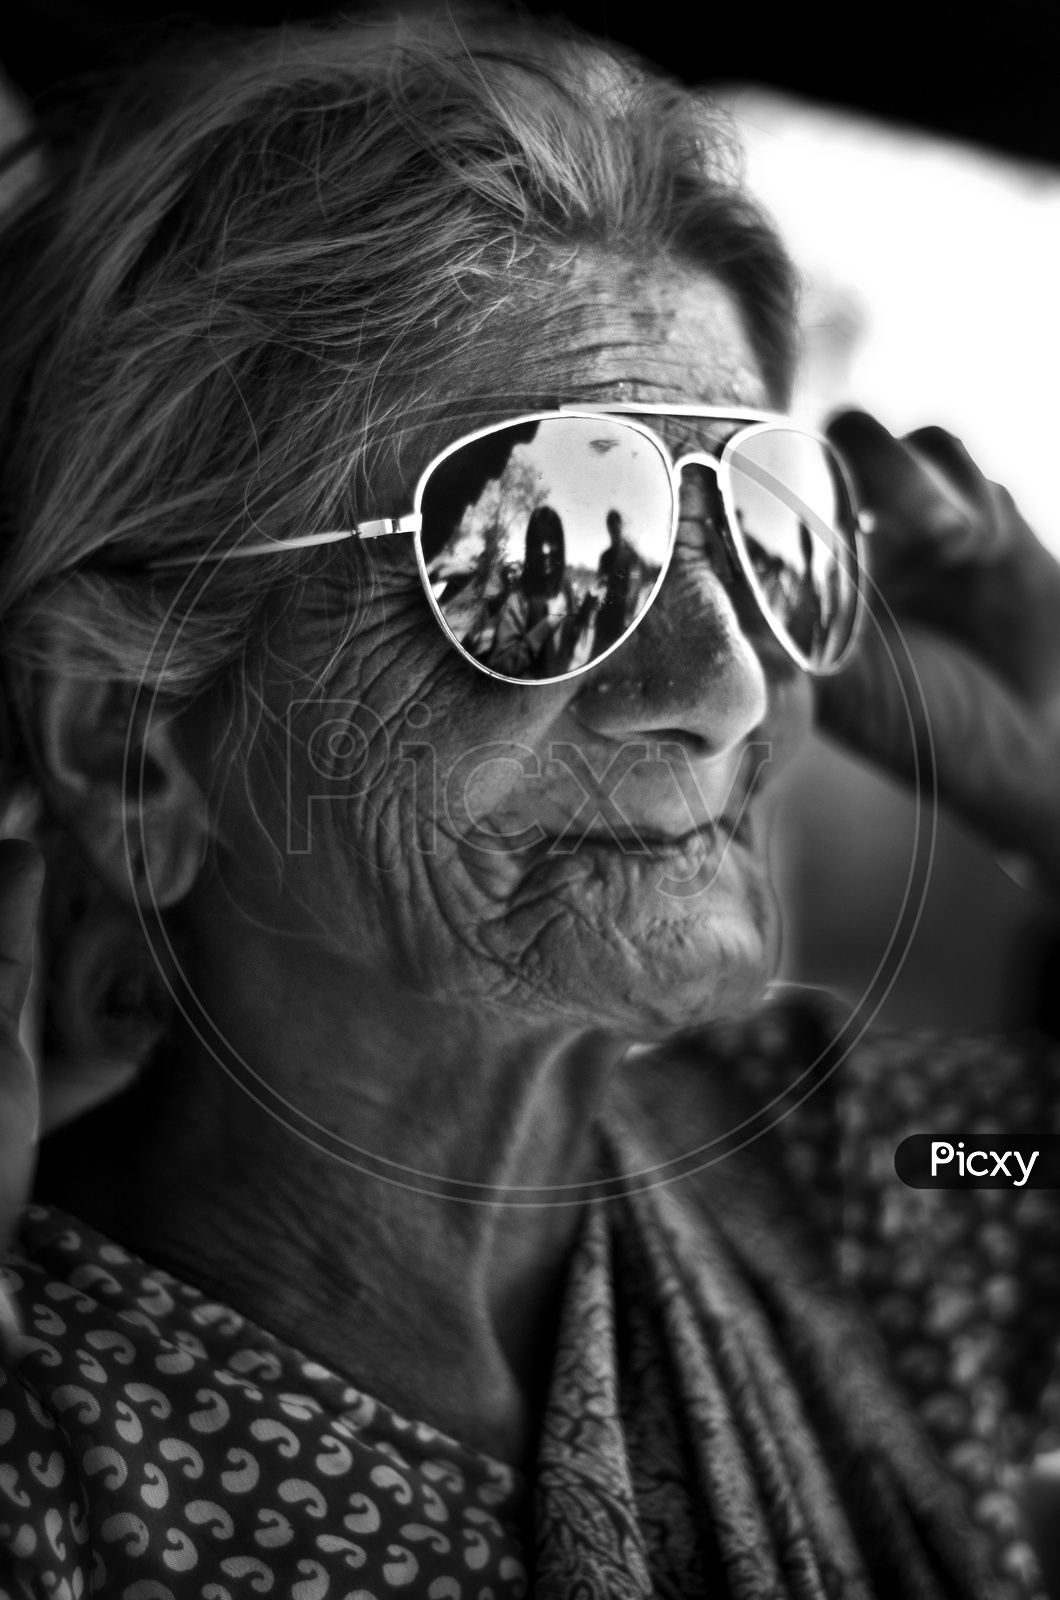 An old lady wearing sunglasses